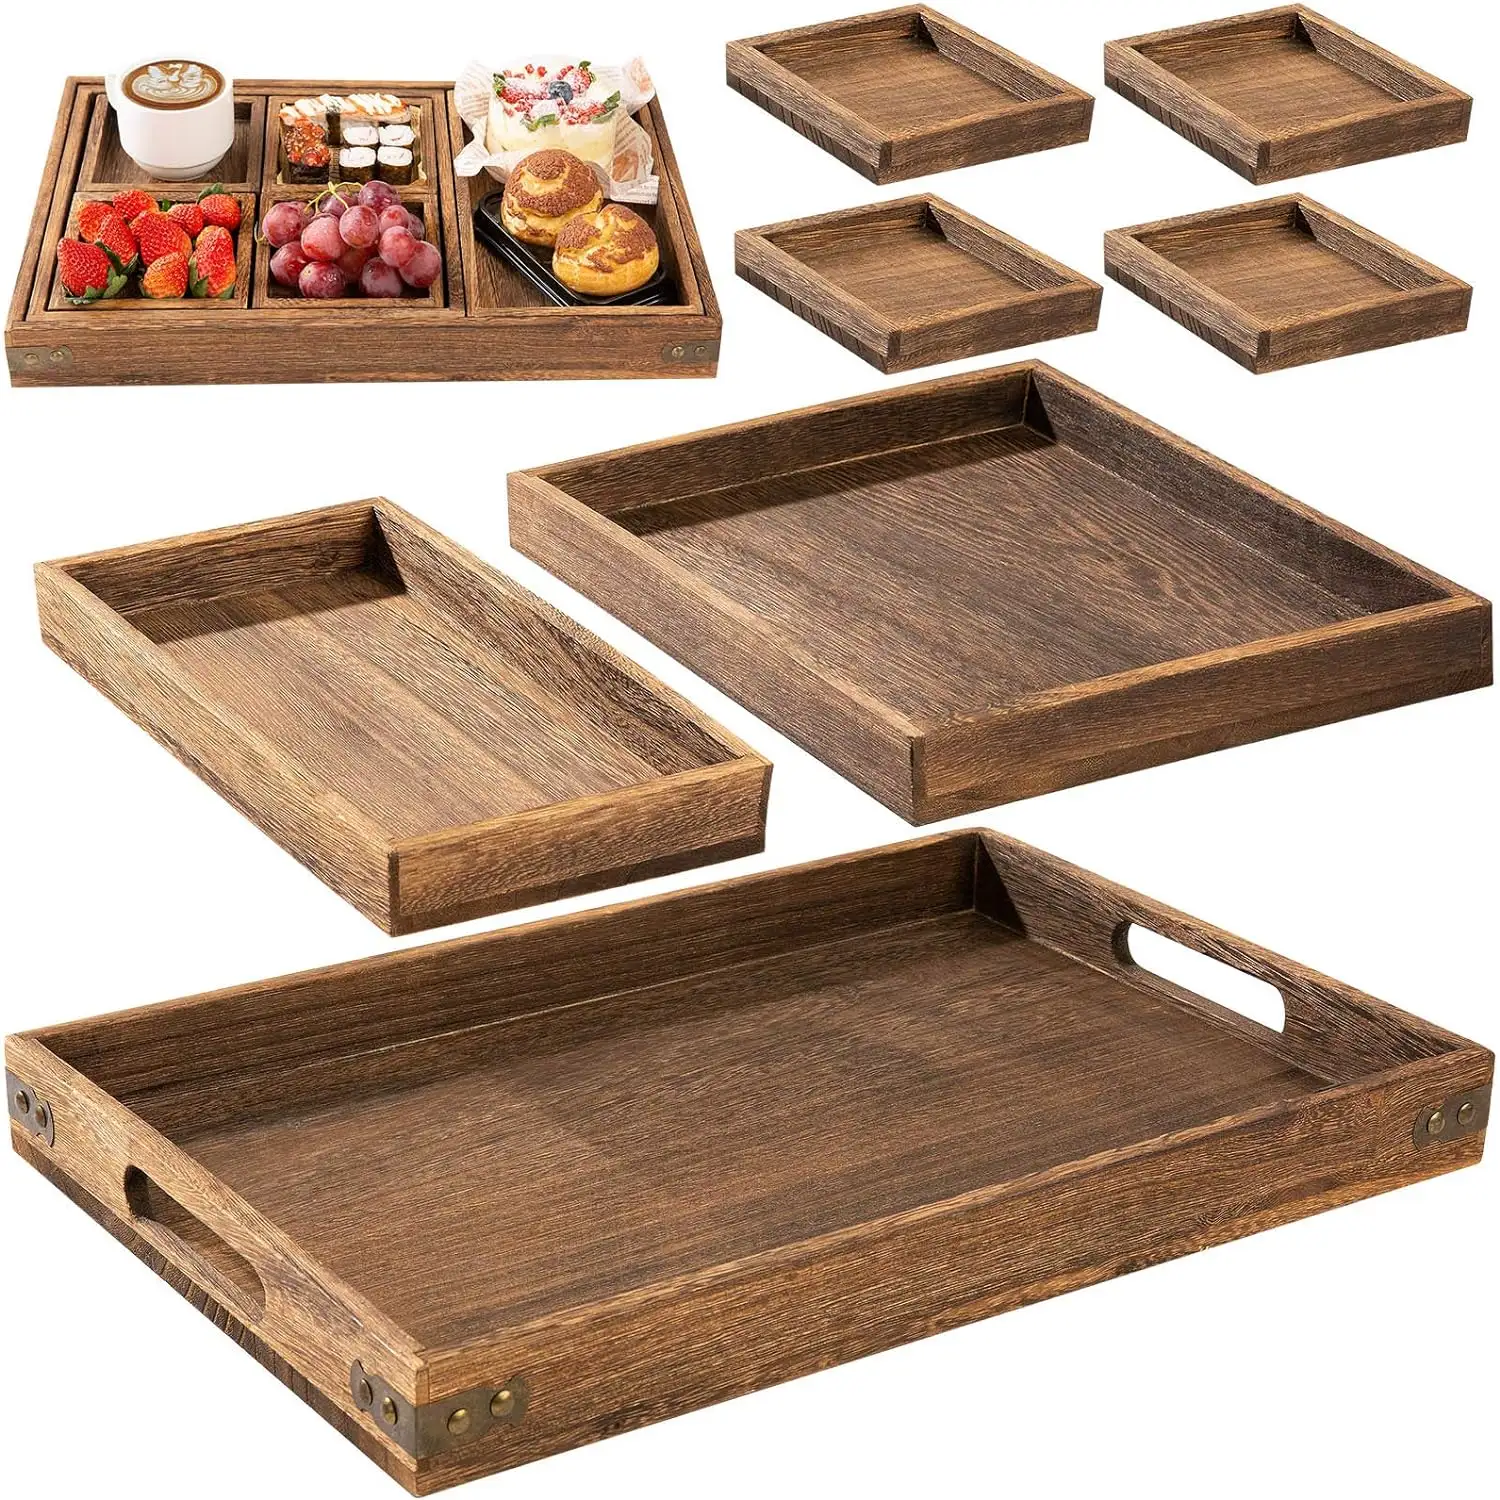 7-Piece Set Country Style Wooden Tray Handle Rectangular Plates Cheese Board for Ottoman Coffee Table Breakfast Home Decor